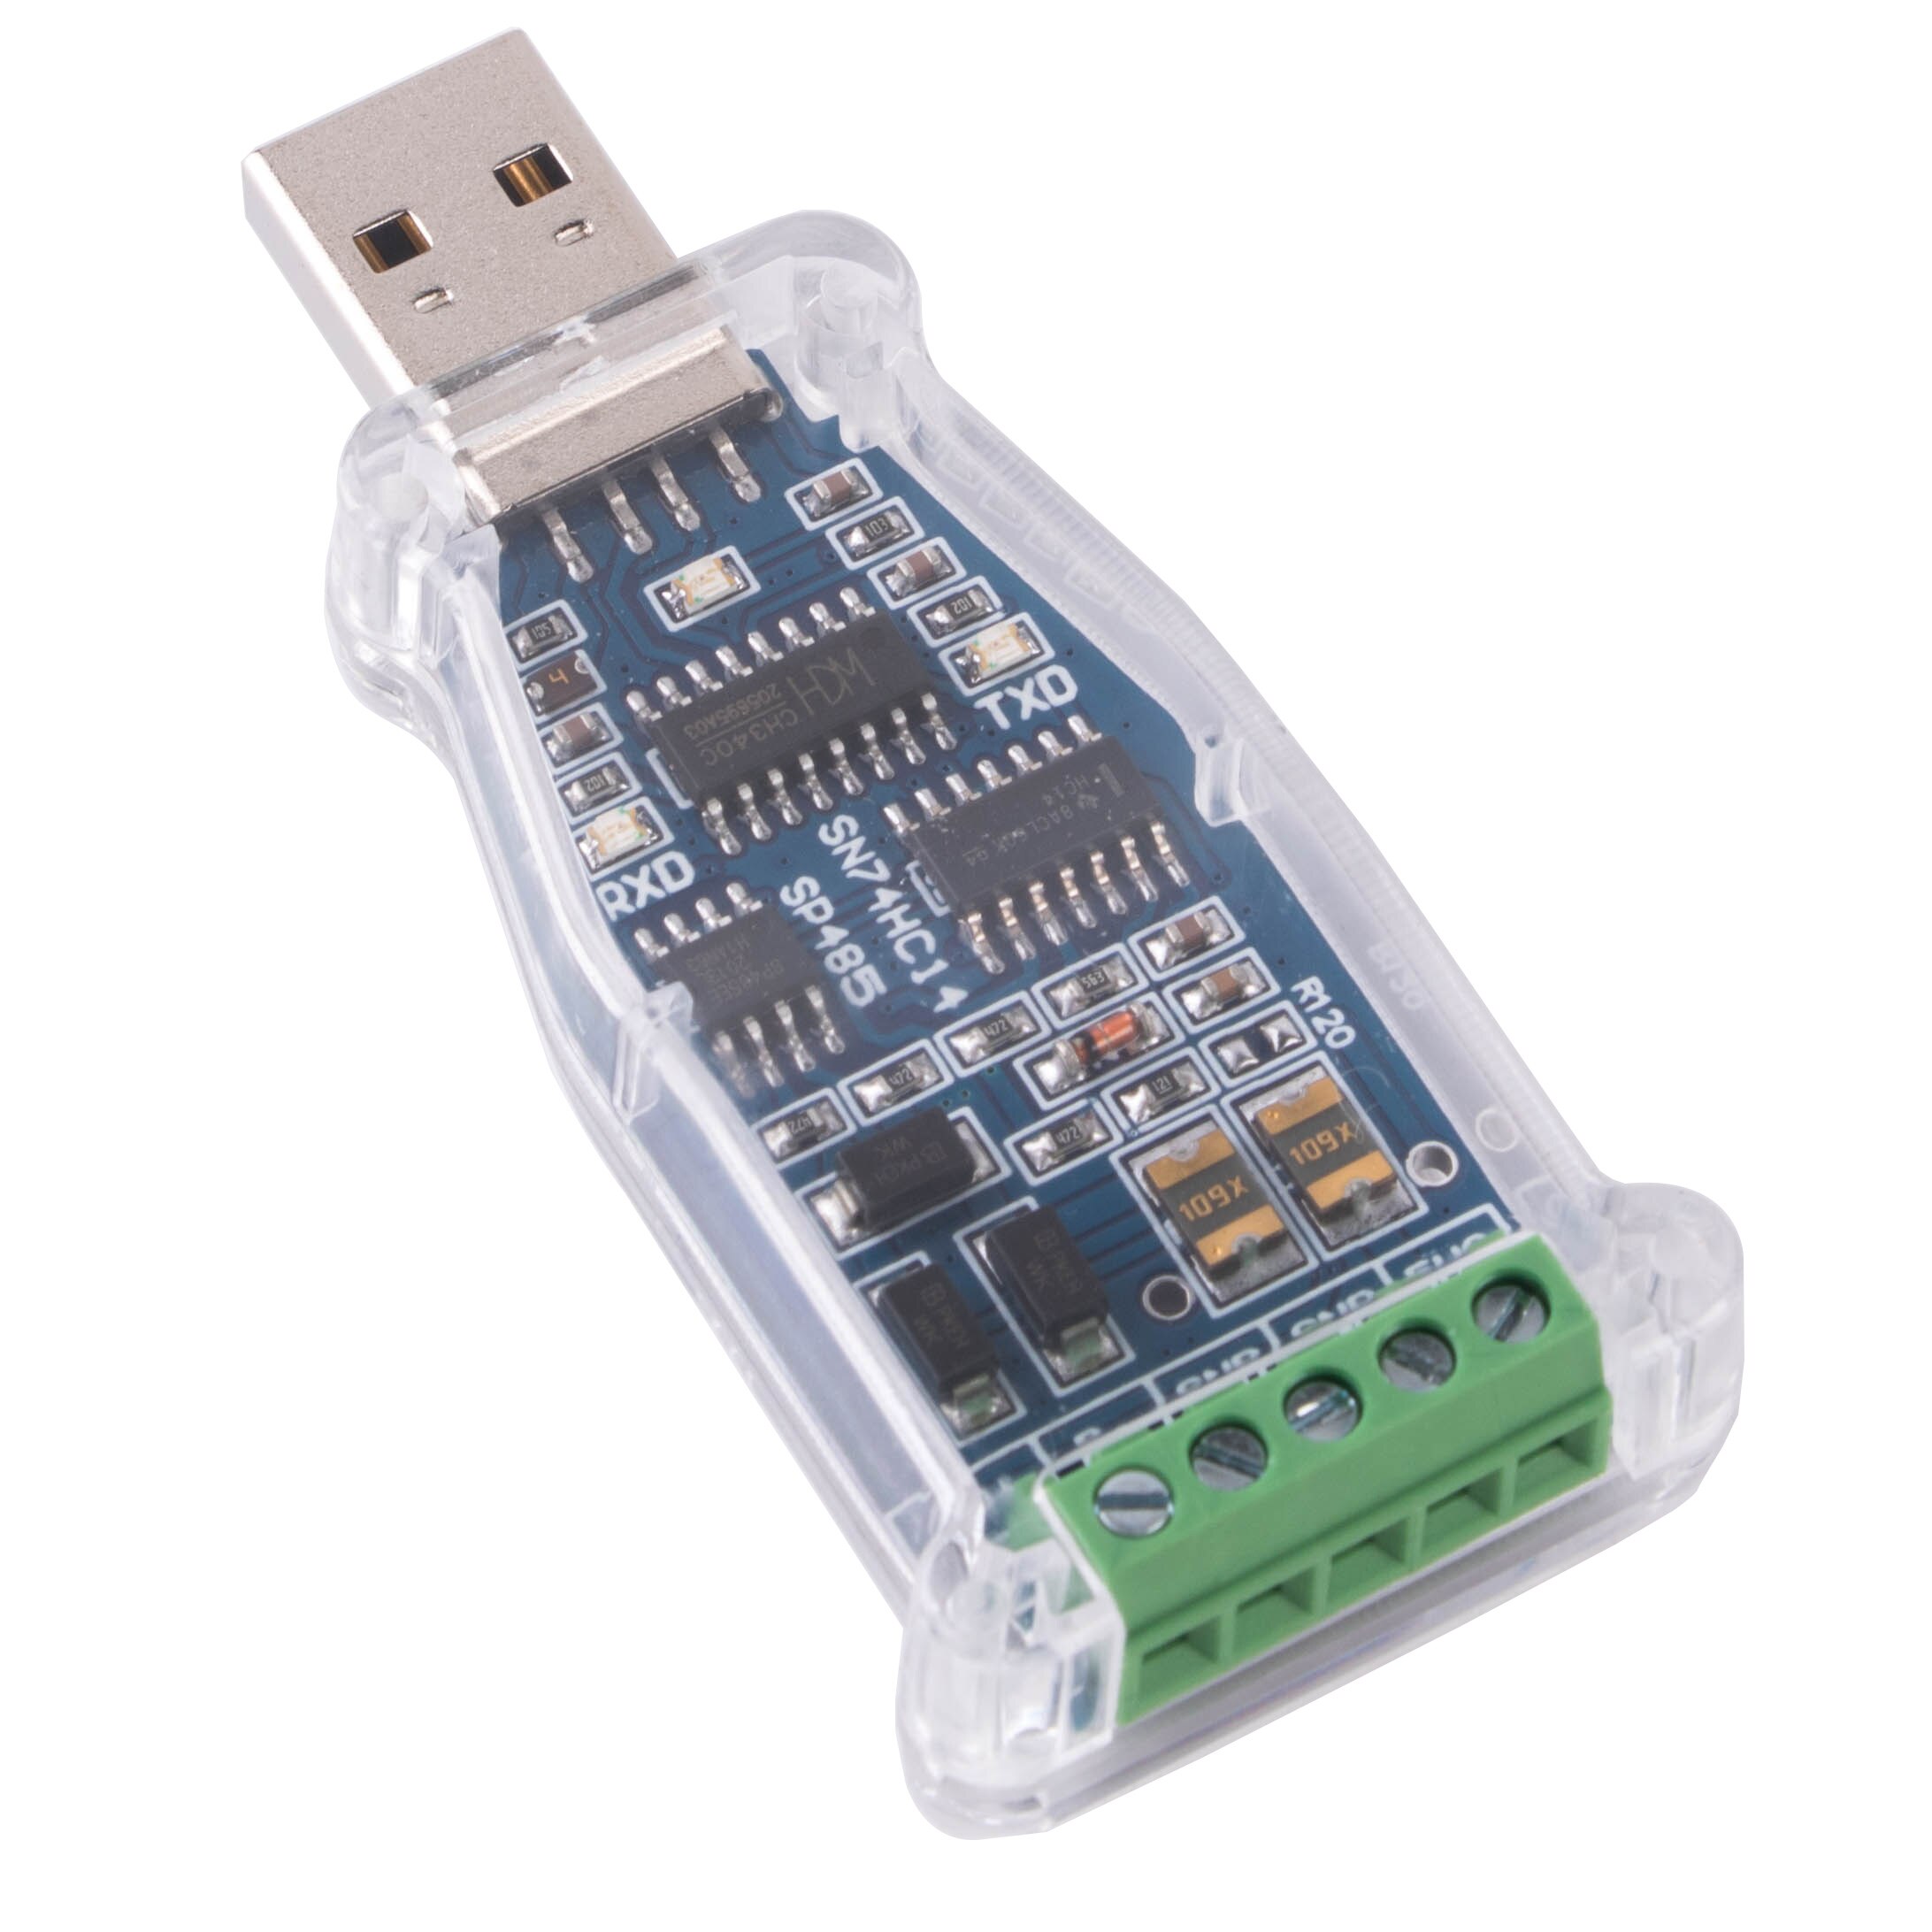 CH340C USB to RS485    921600 Bps  ..